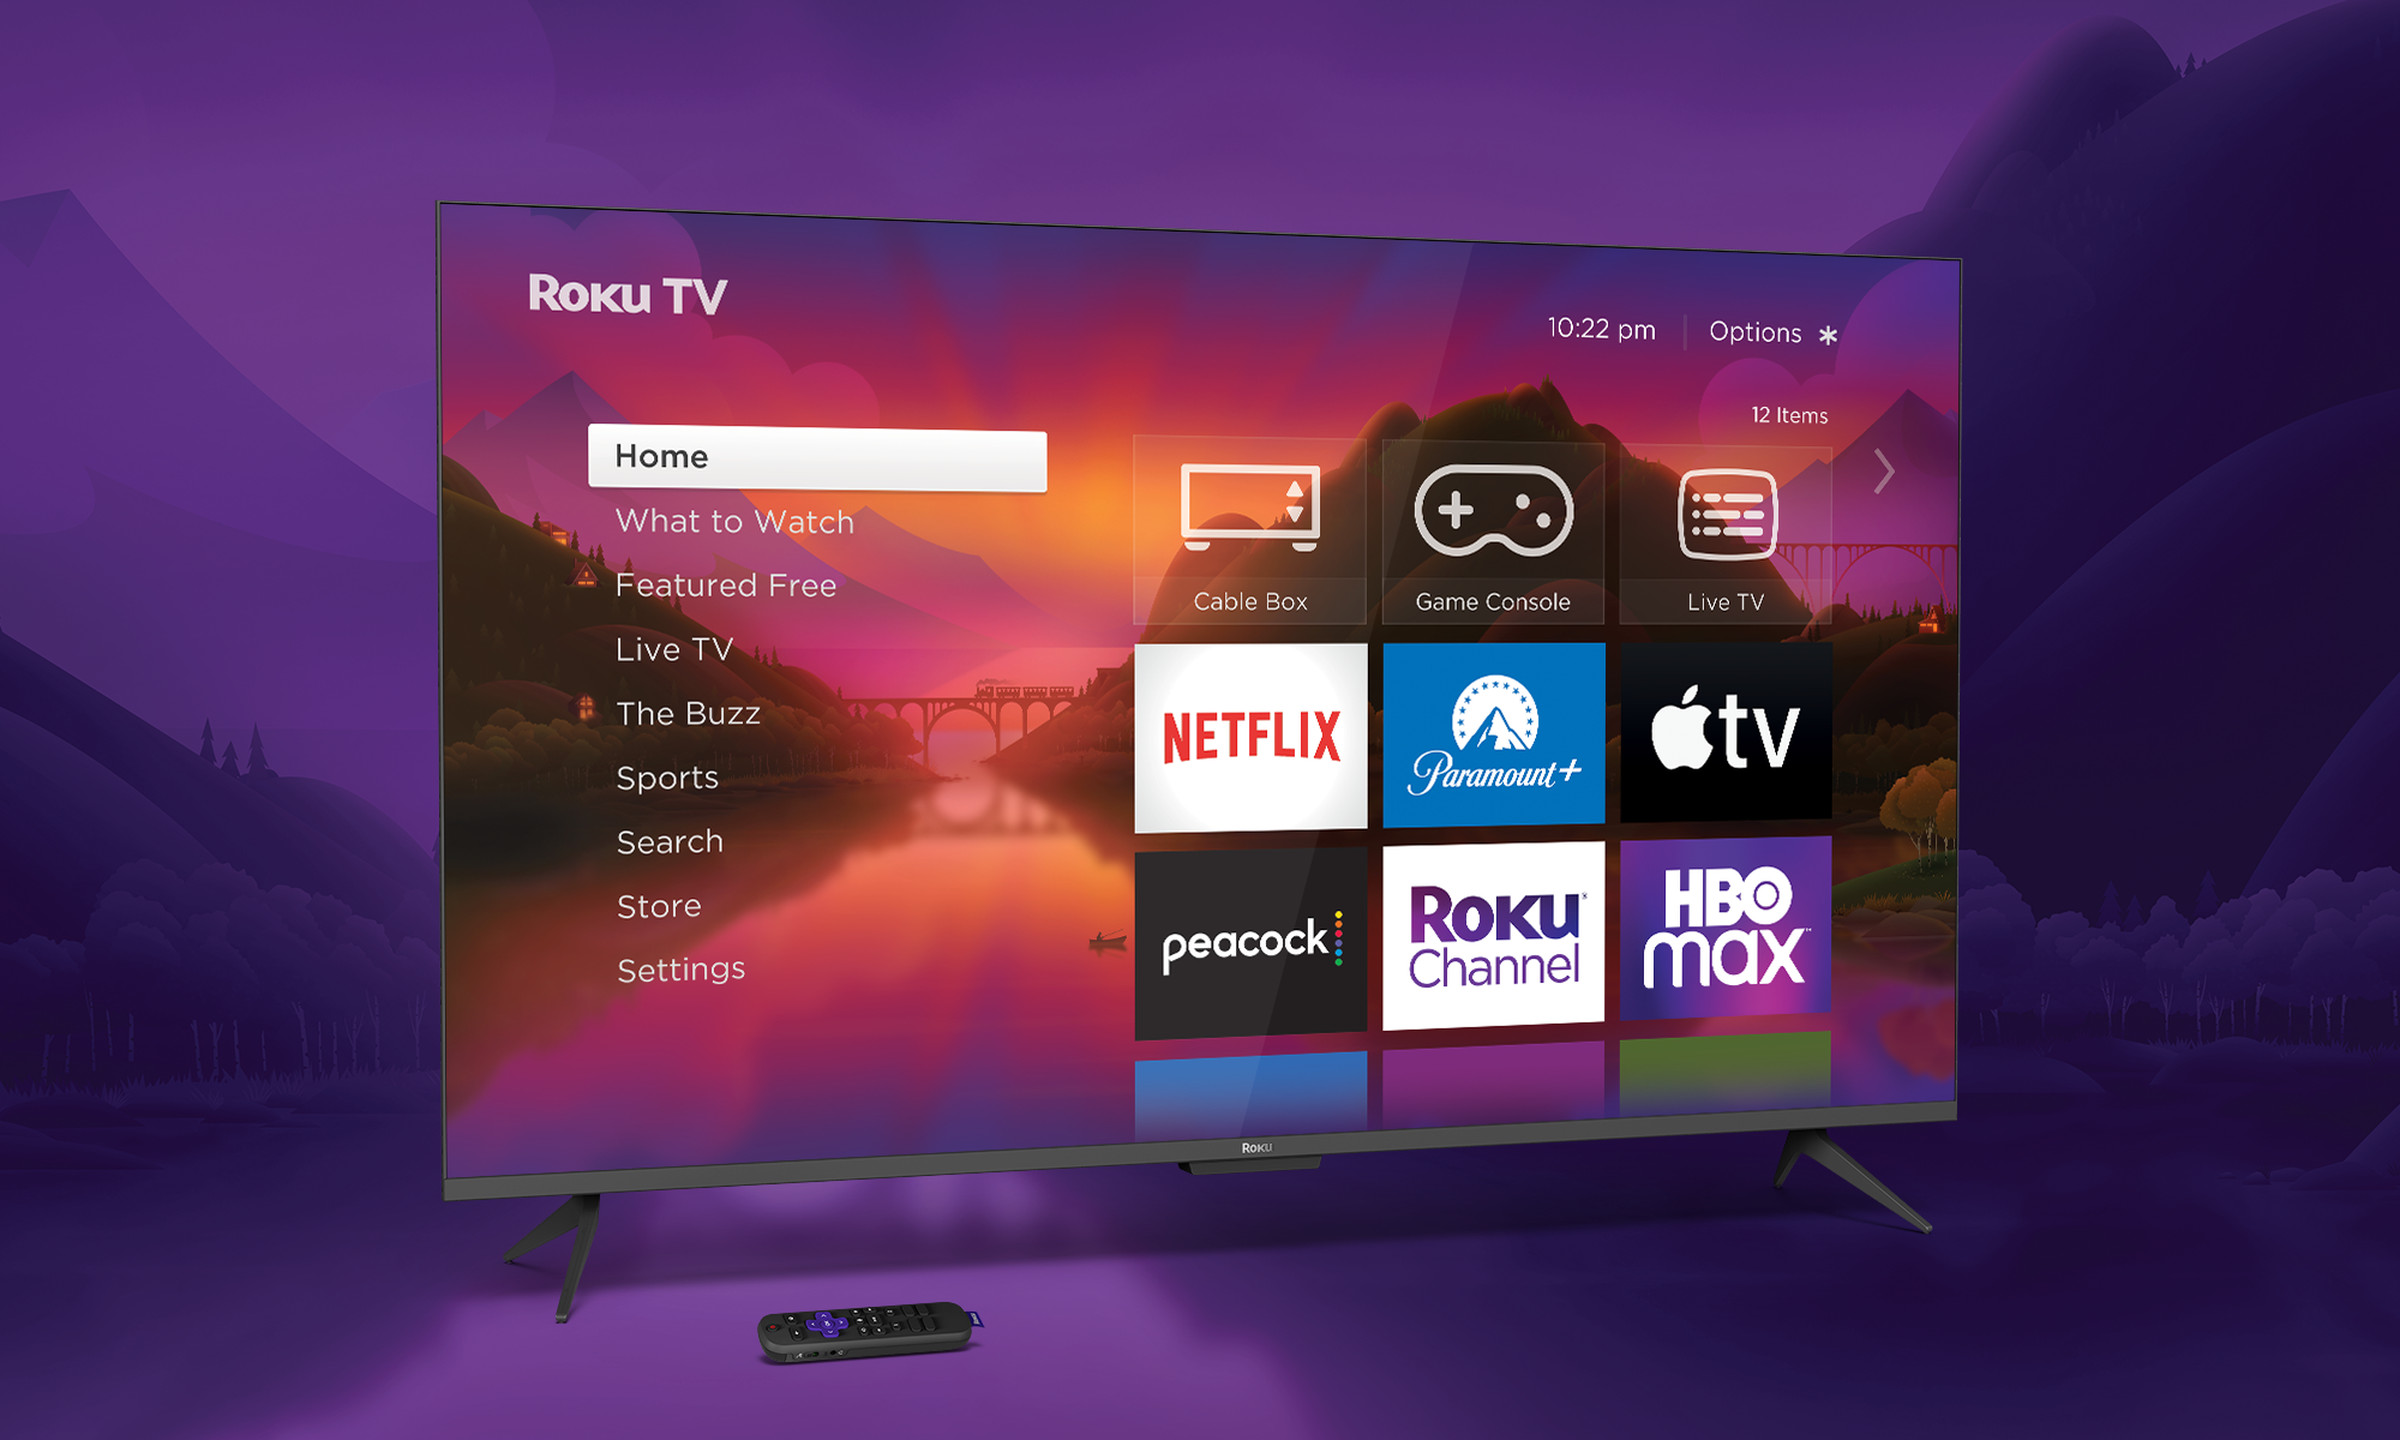 An image of a Roku TV with a purple background.